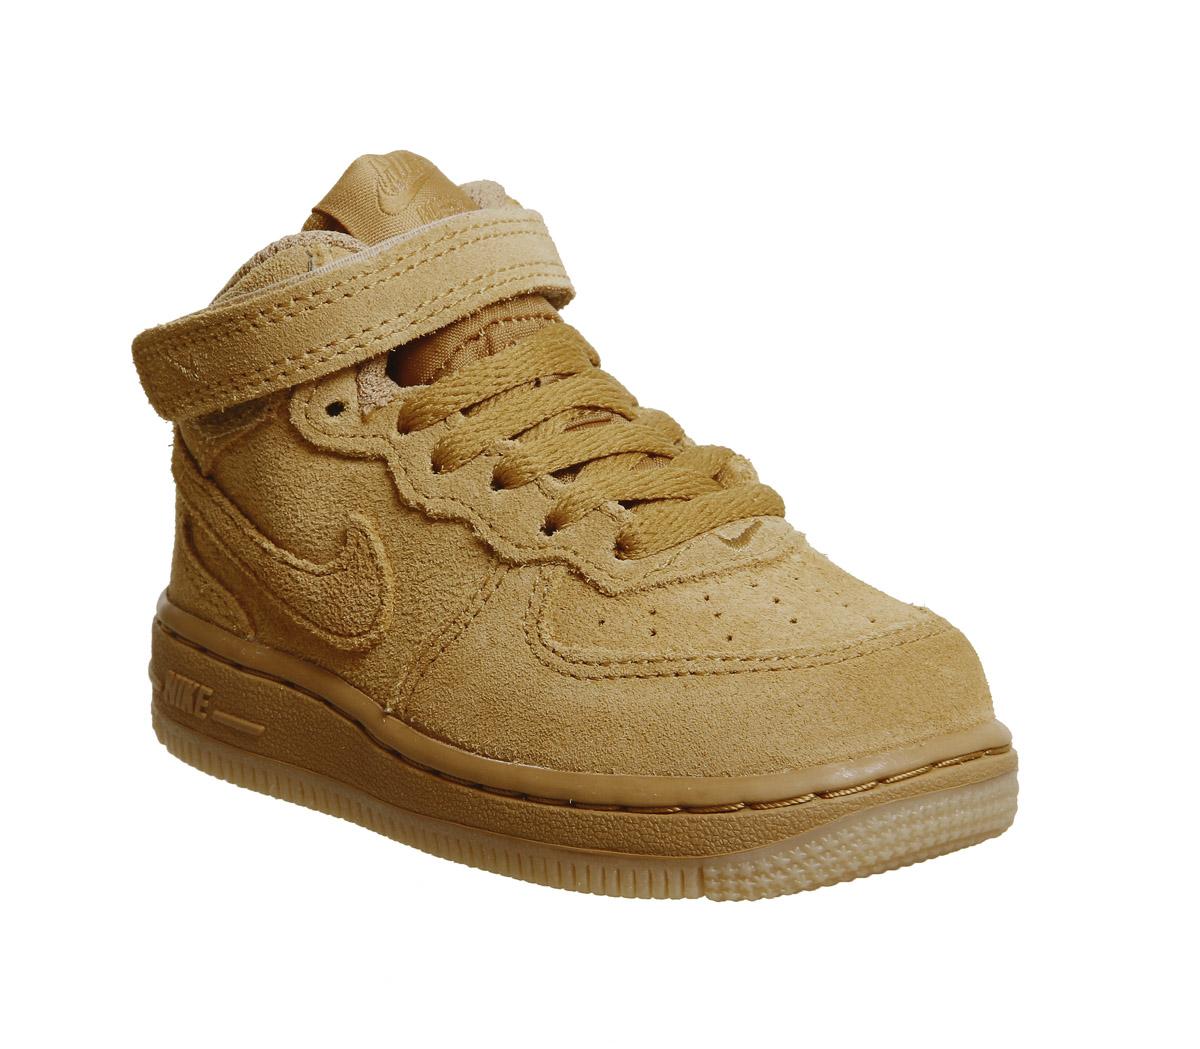 Nike Af1 Mid Infant Trainers Wheat 